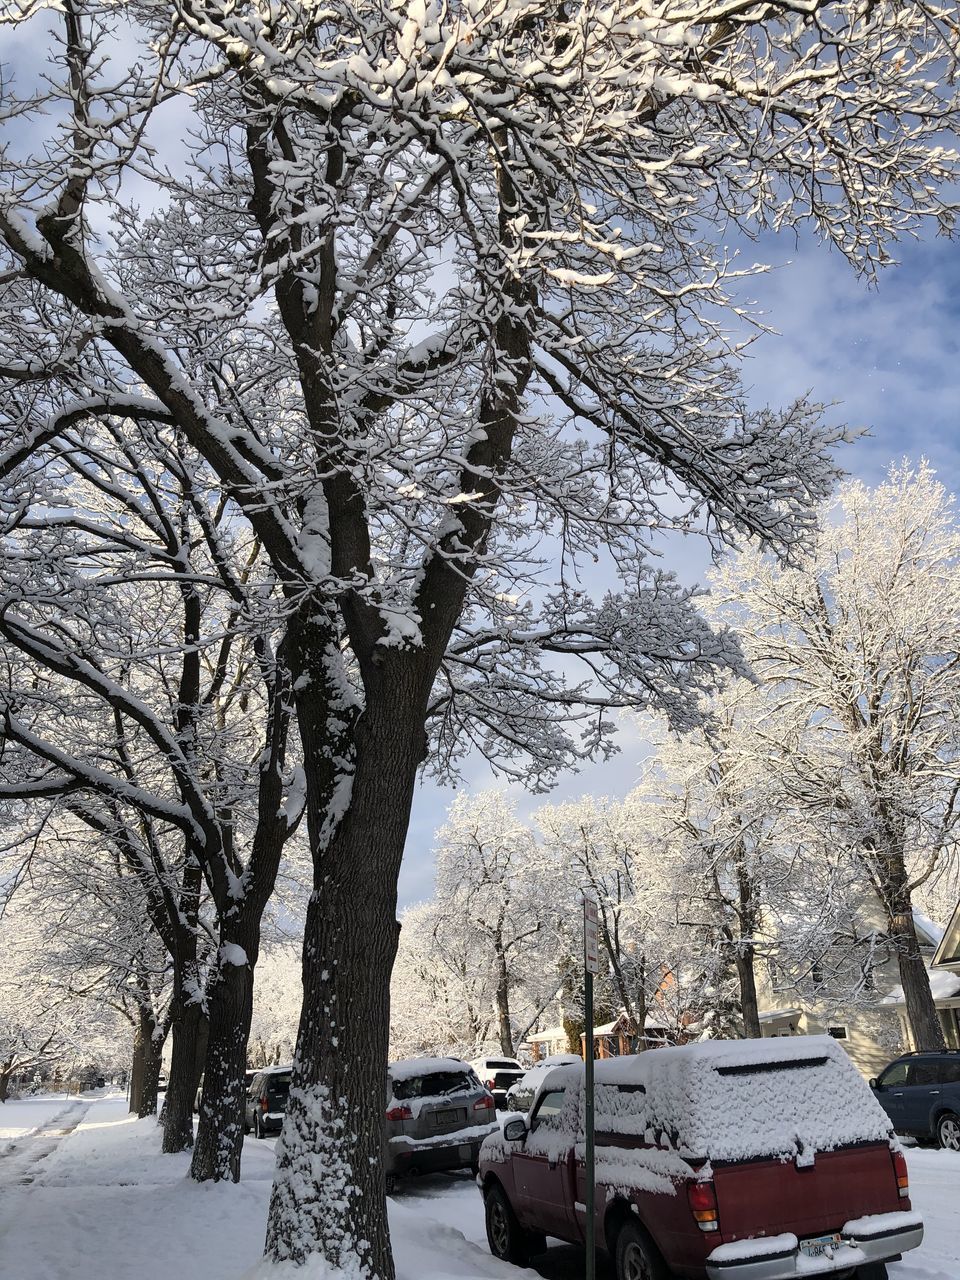 SNOW COVERED ROAD BY TREES IN CITY